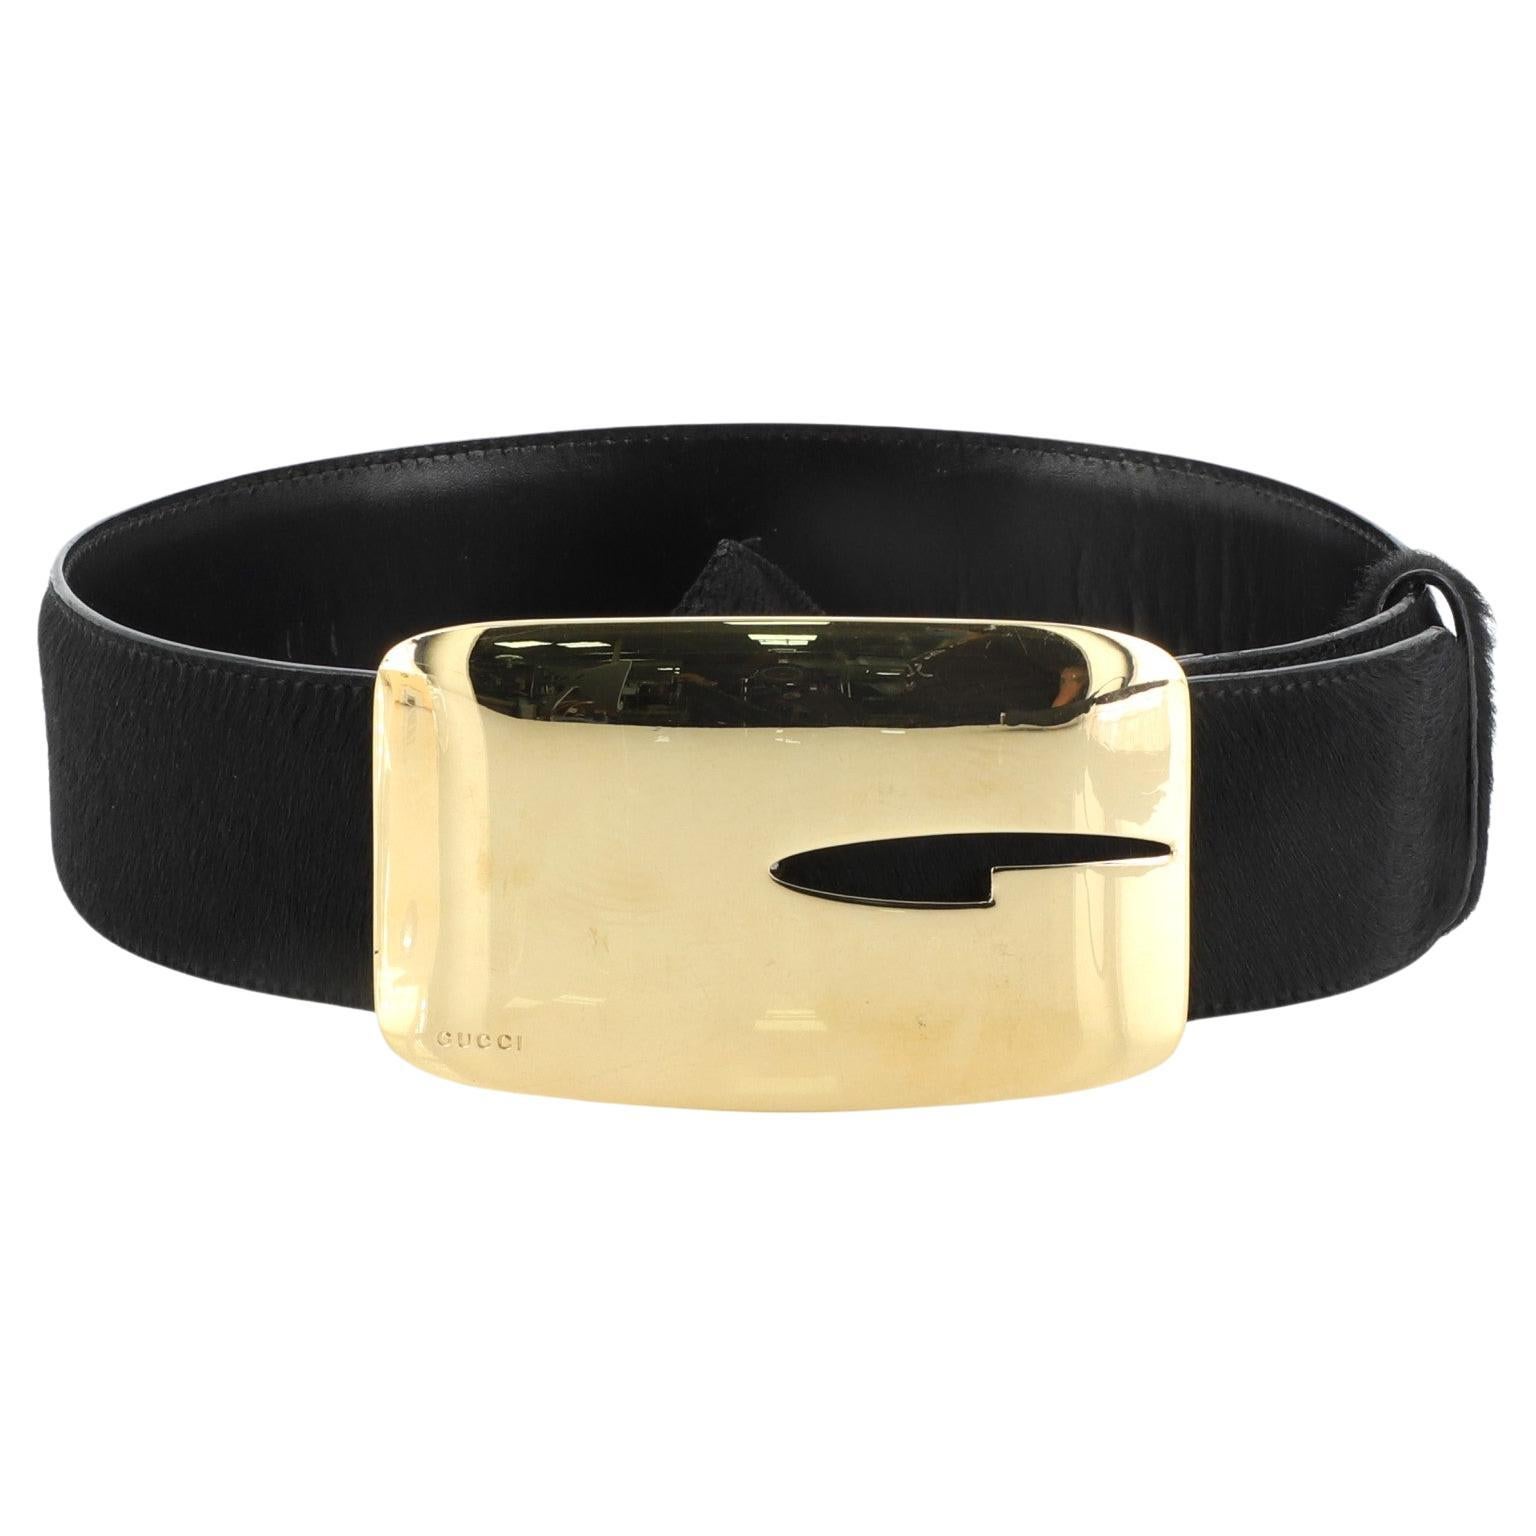 Gucci Abstract G Buckle Belt Pony Hair Wide Black